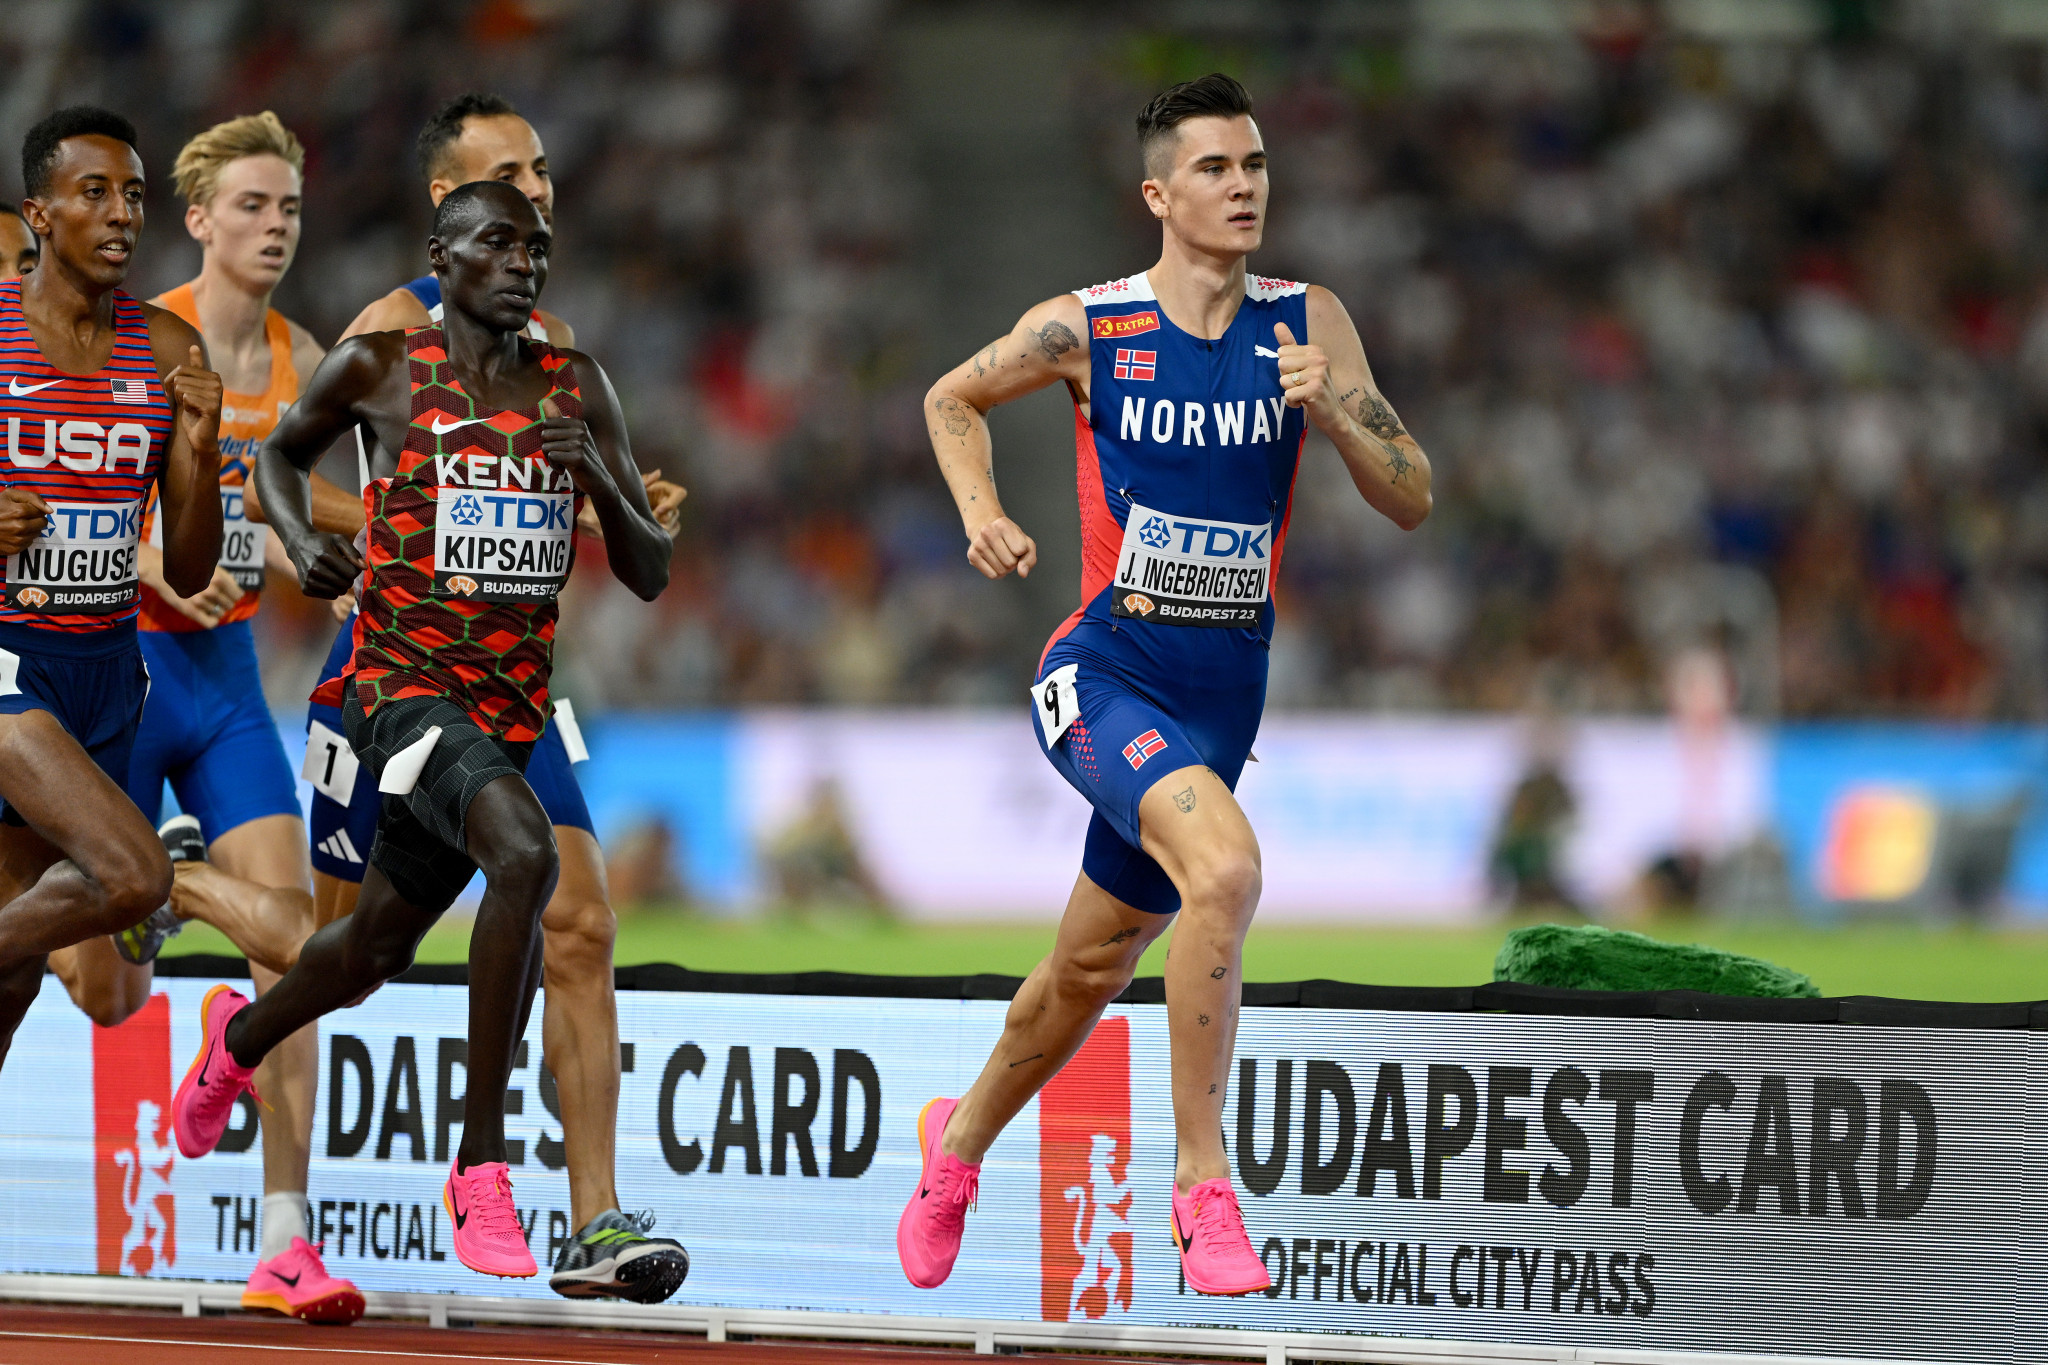 Norway's Jakob Ingebrigtsen, right, had led for most of the men's 1500m final but had to settle for silver for the second year running ©Getty Images